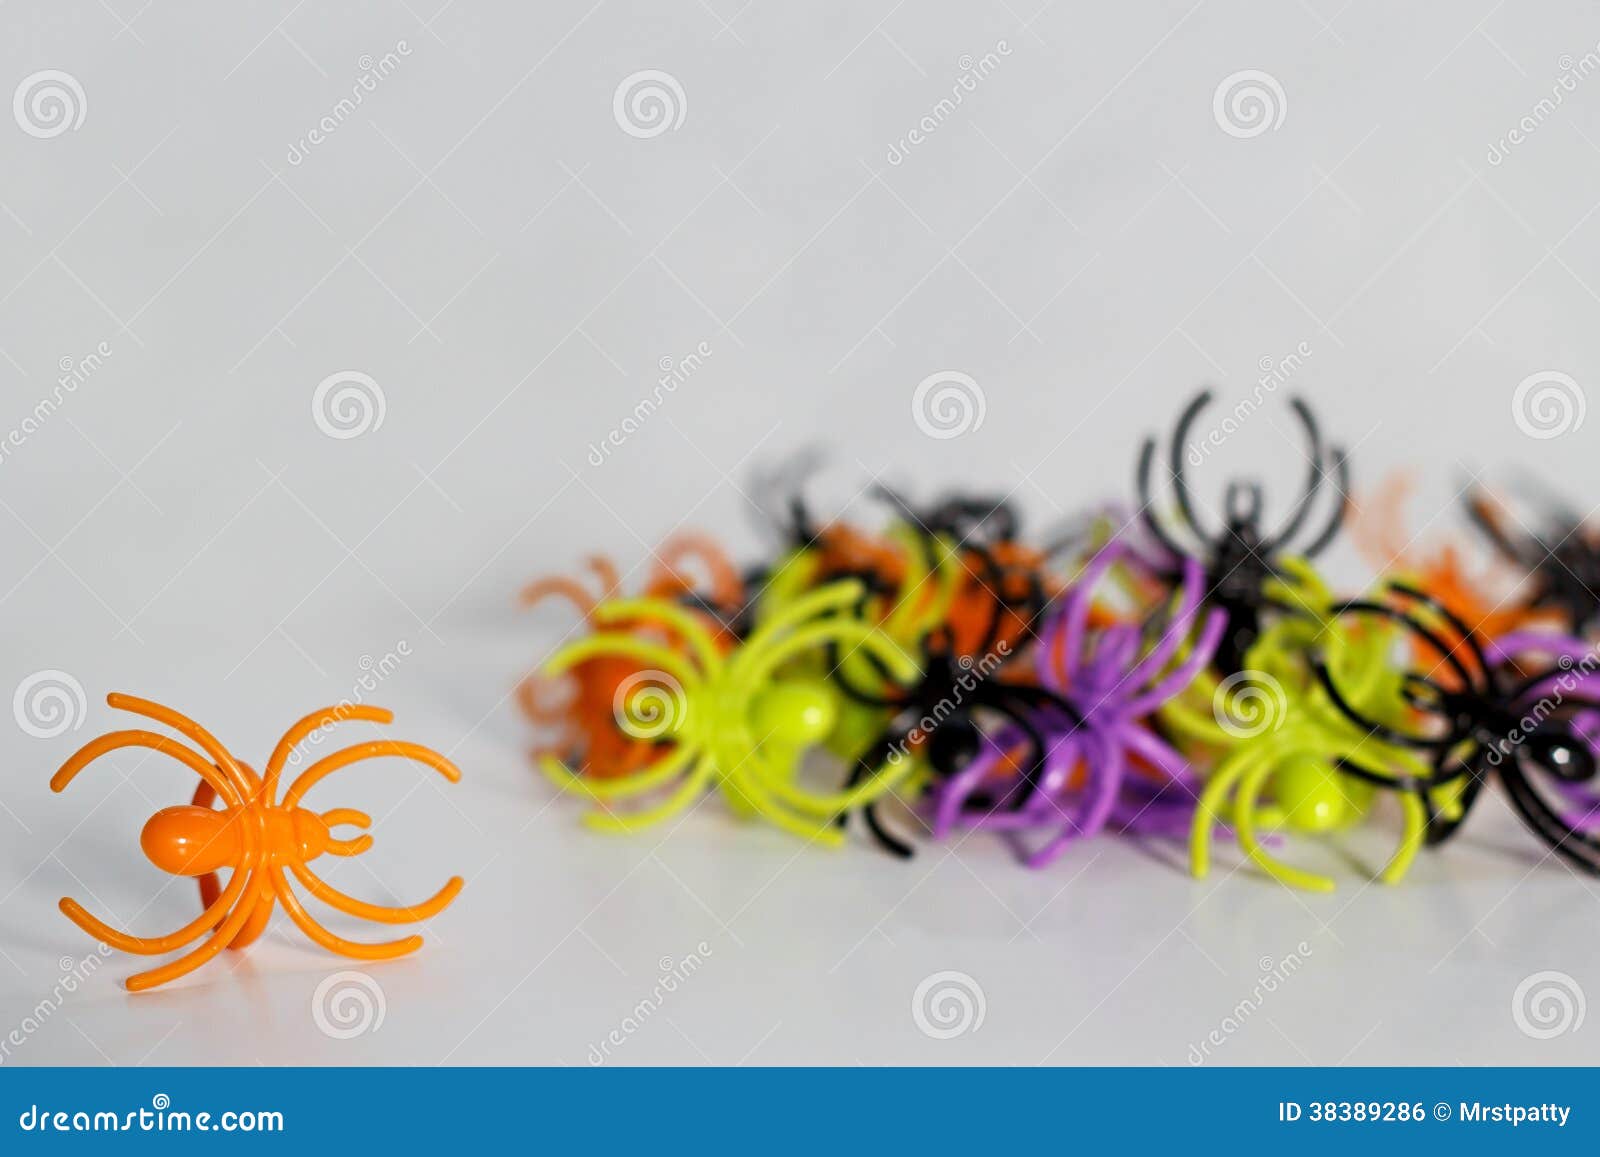 Plastic toy spider rings stock photo. Image of closeup